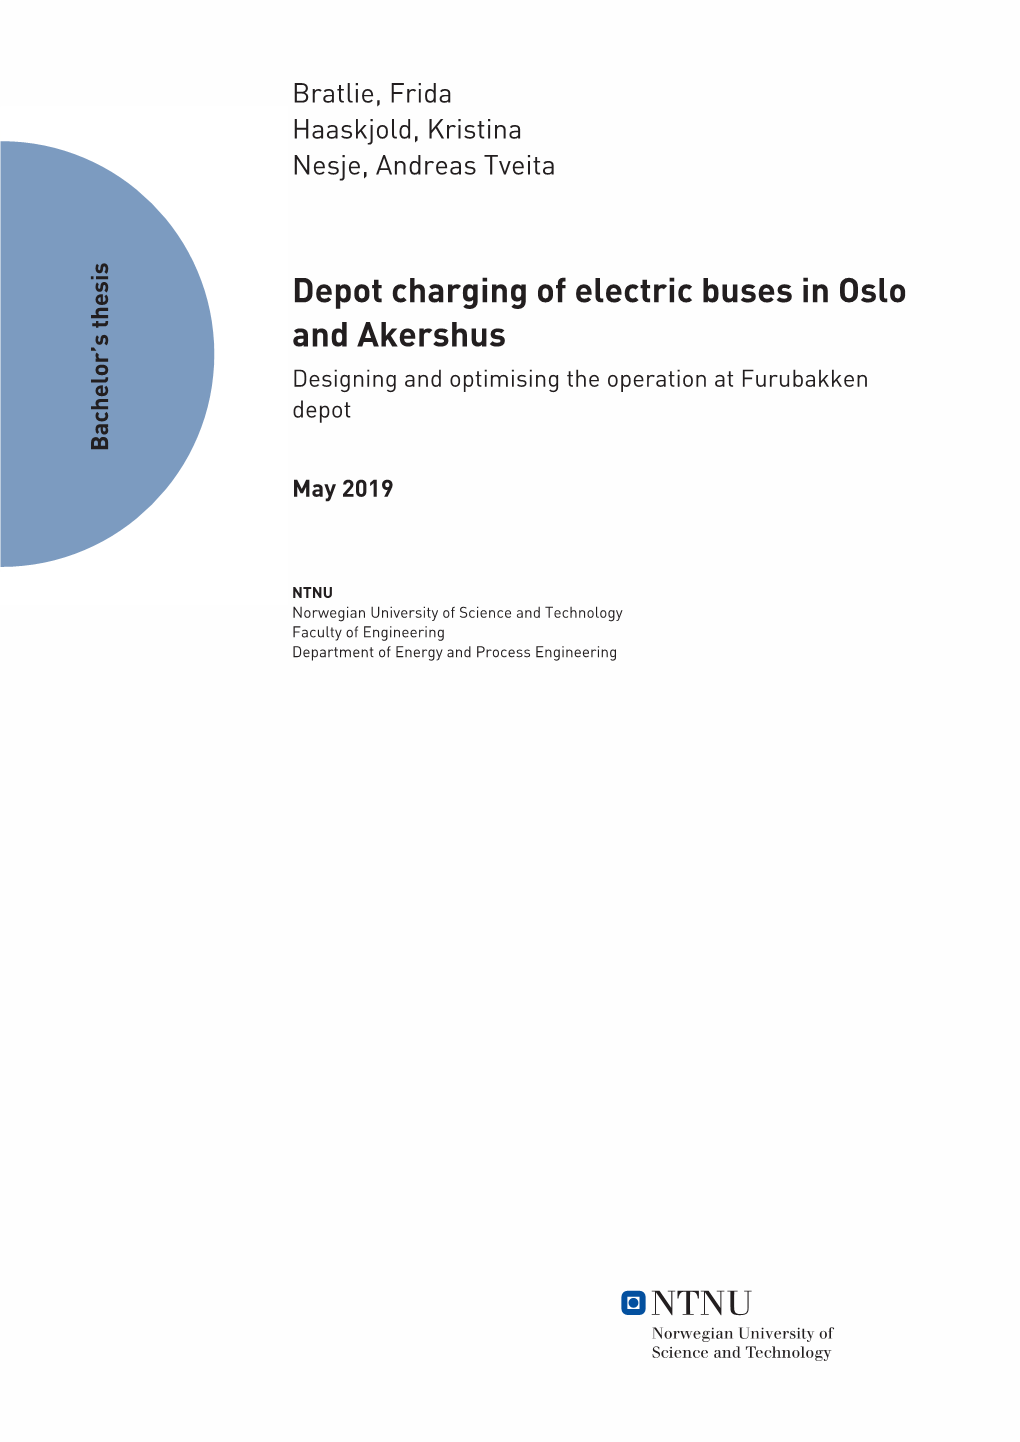 Depot Charging of Electric Buses in Oslo and Akershus